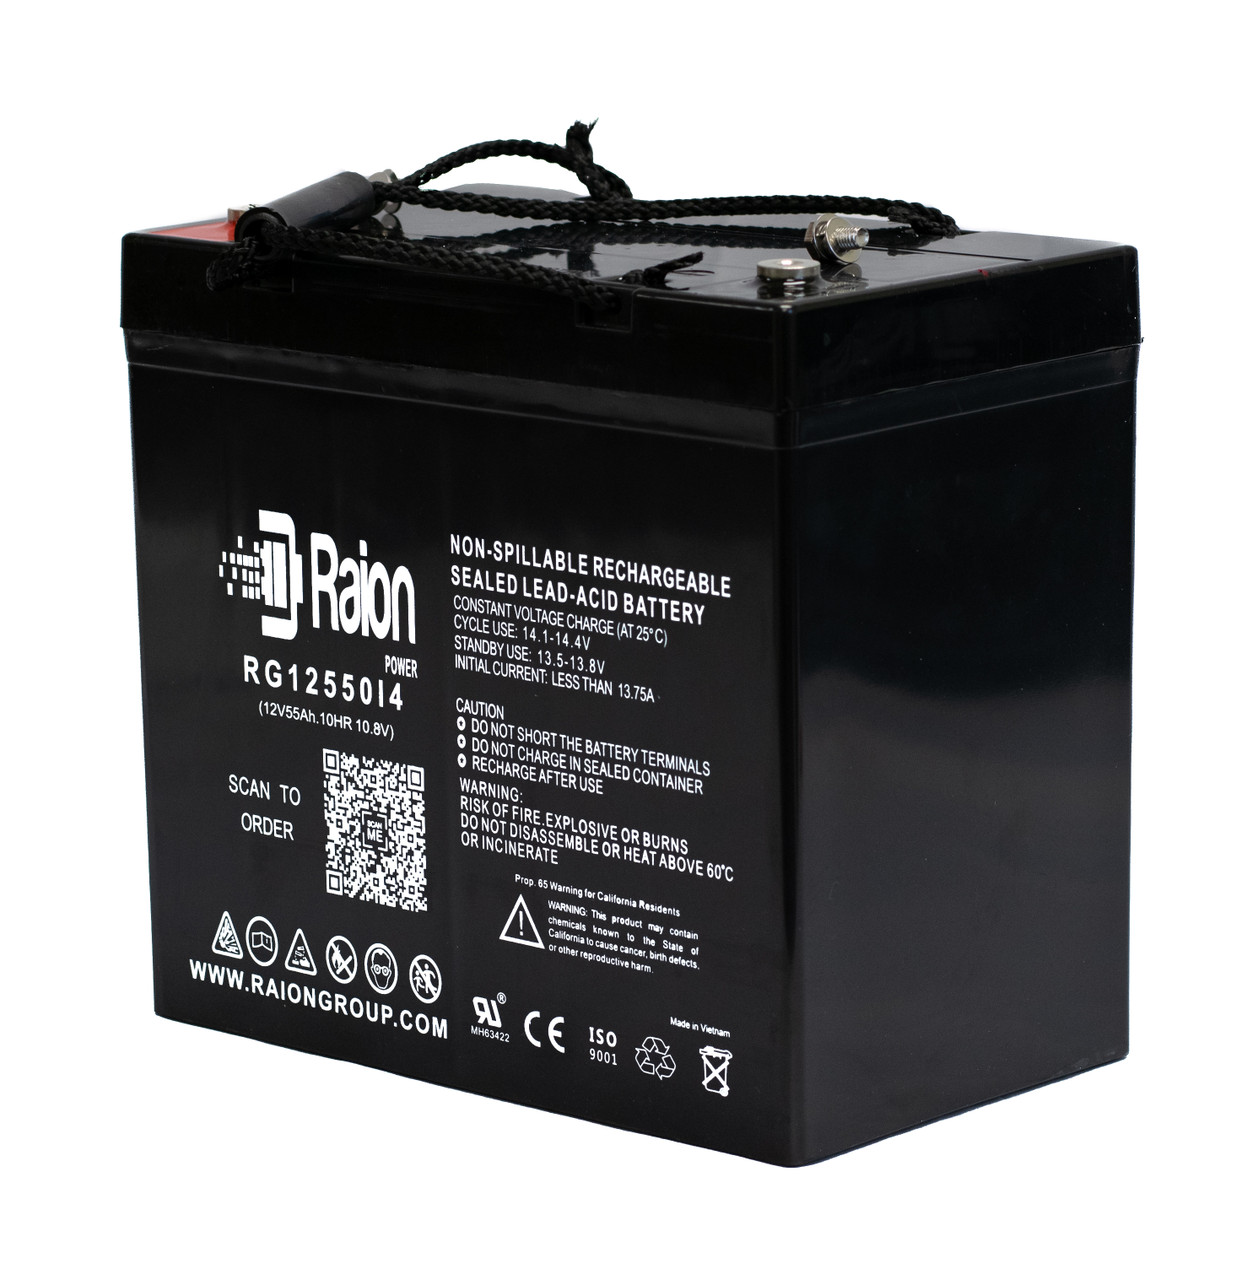 Raion Power Replacement 12V 55Ah Battery for Exell EB12550 - 1 Pack